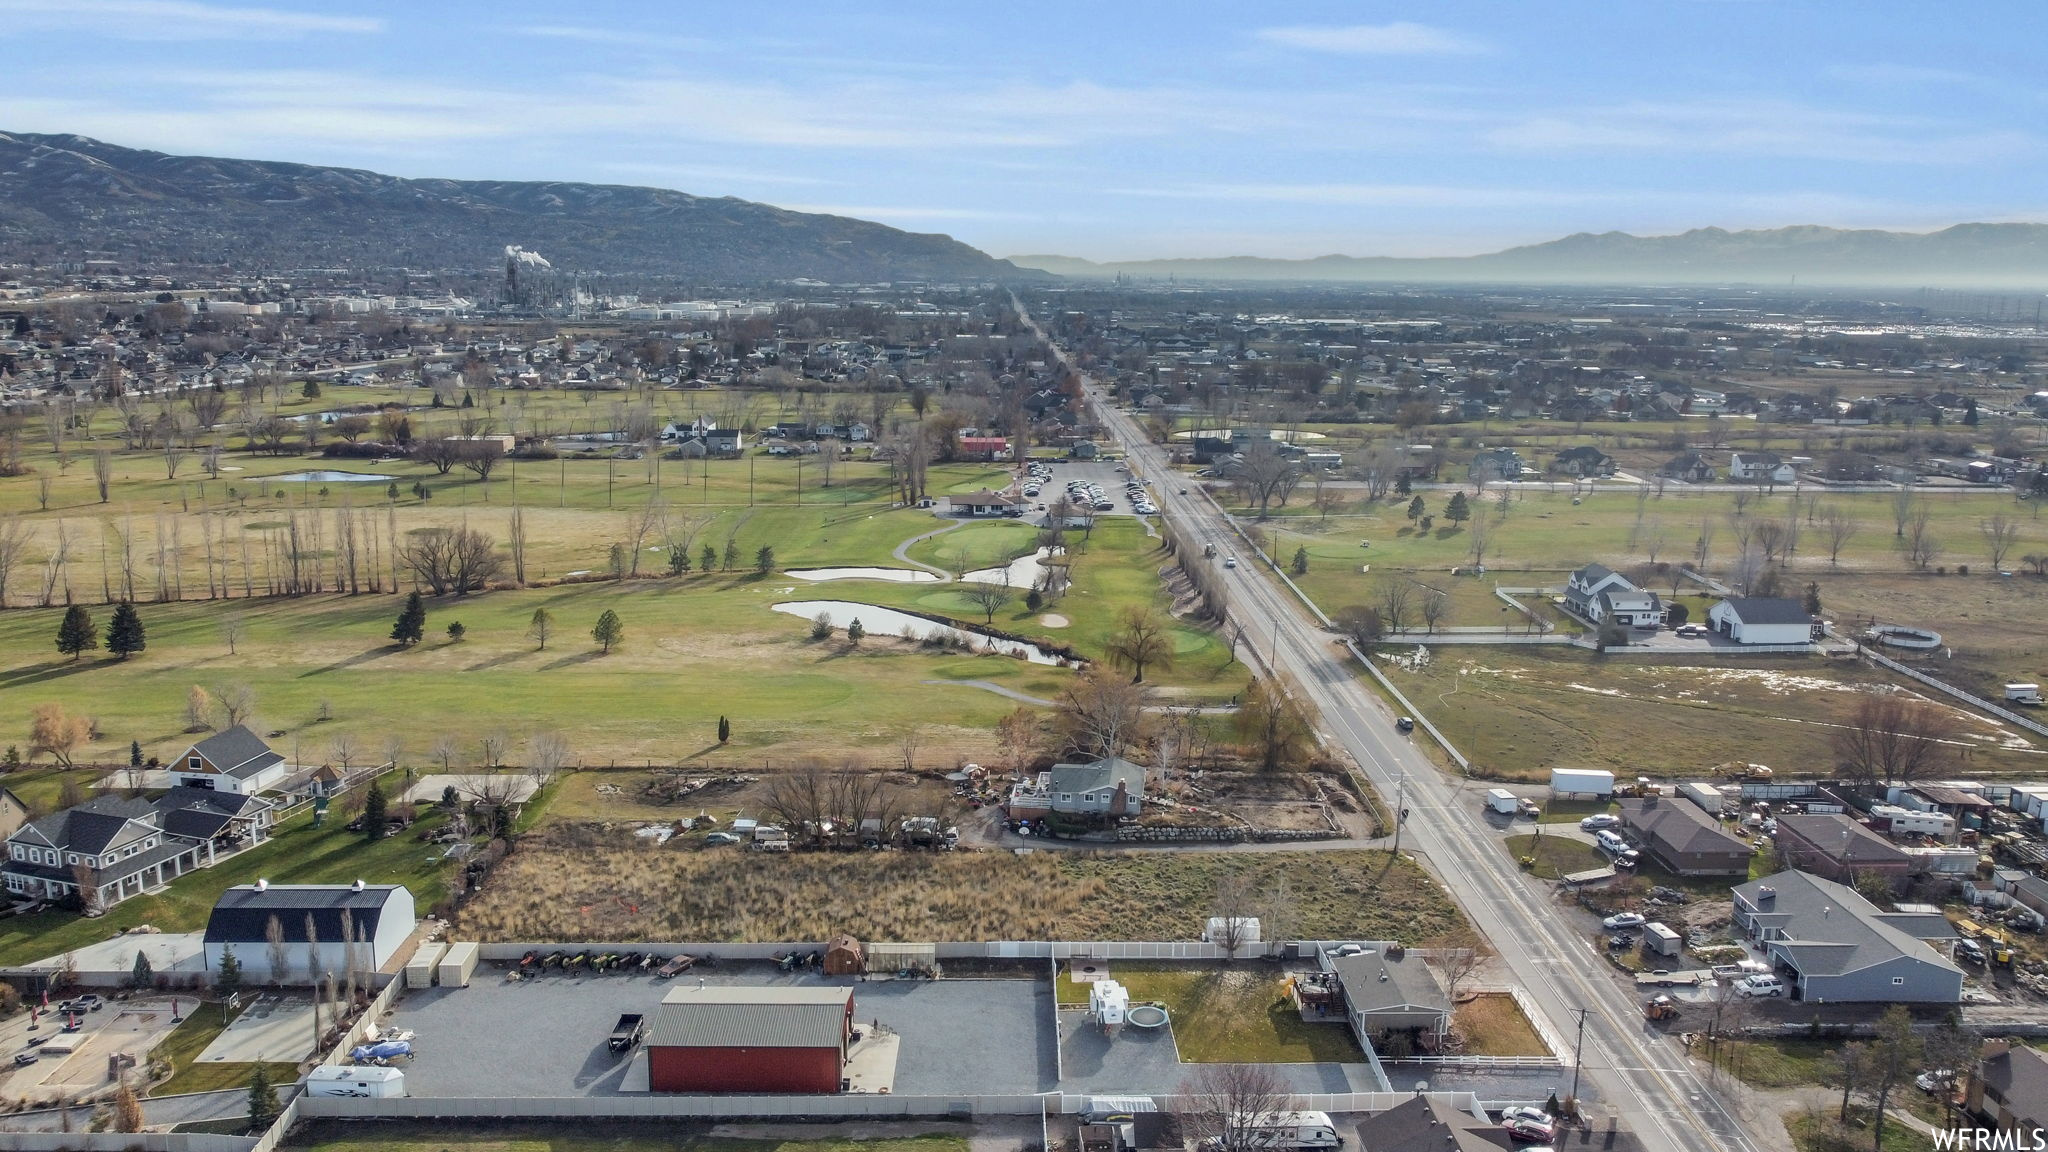 Drone / aerial view looking south and featuring Lakeview golf course